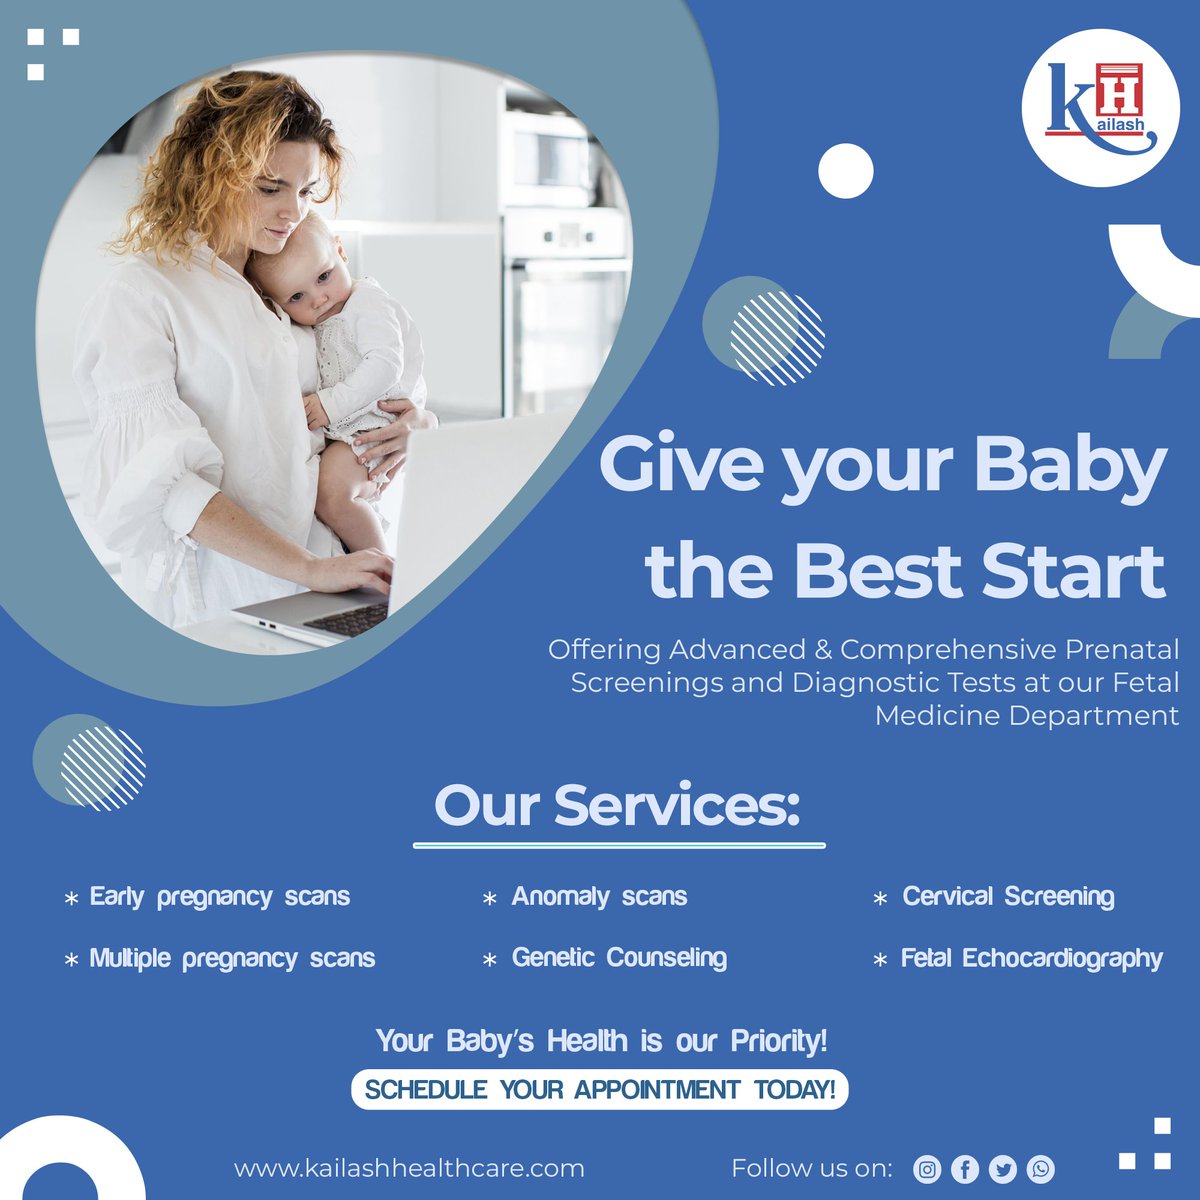 Planning pregnancy? Consider fetal medicine for comprehensive care & a healthy start for your precious one. #FetalMedicine helps ensure the health of both you & your baby. Get personalized advice by our Fetal Medicine experts: kailashhealthcare.com #PrenatalCare…